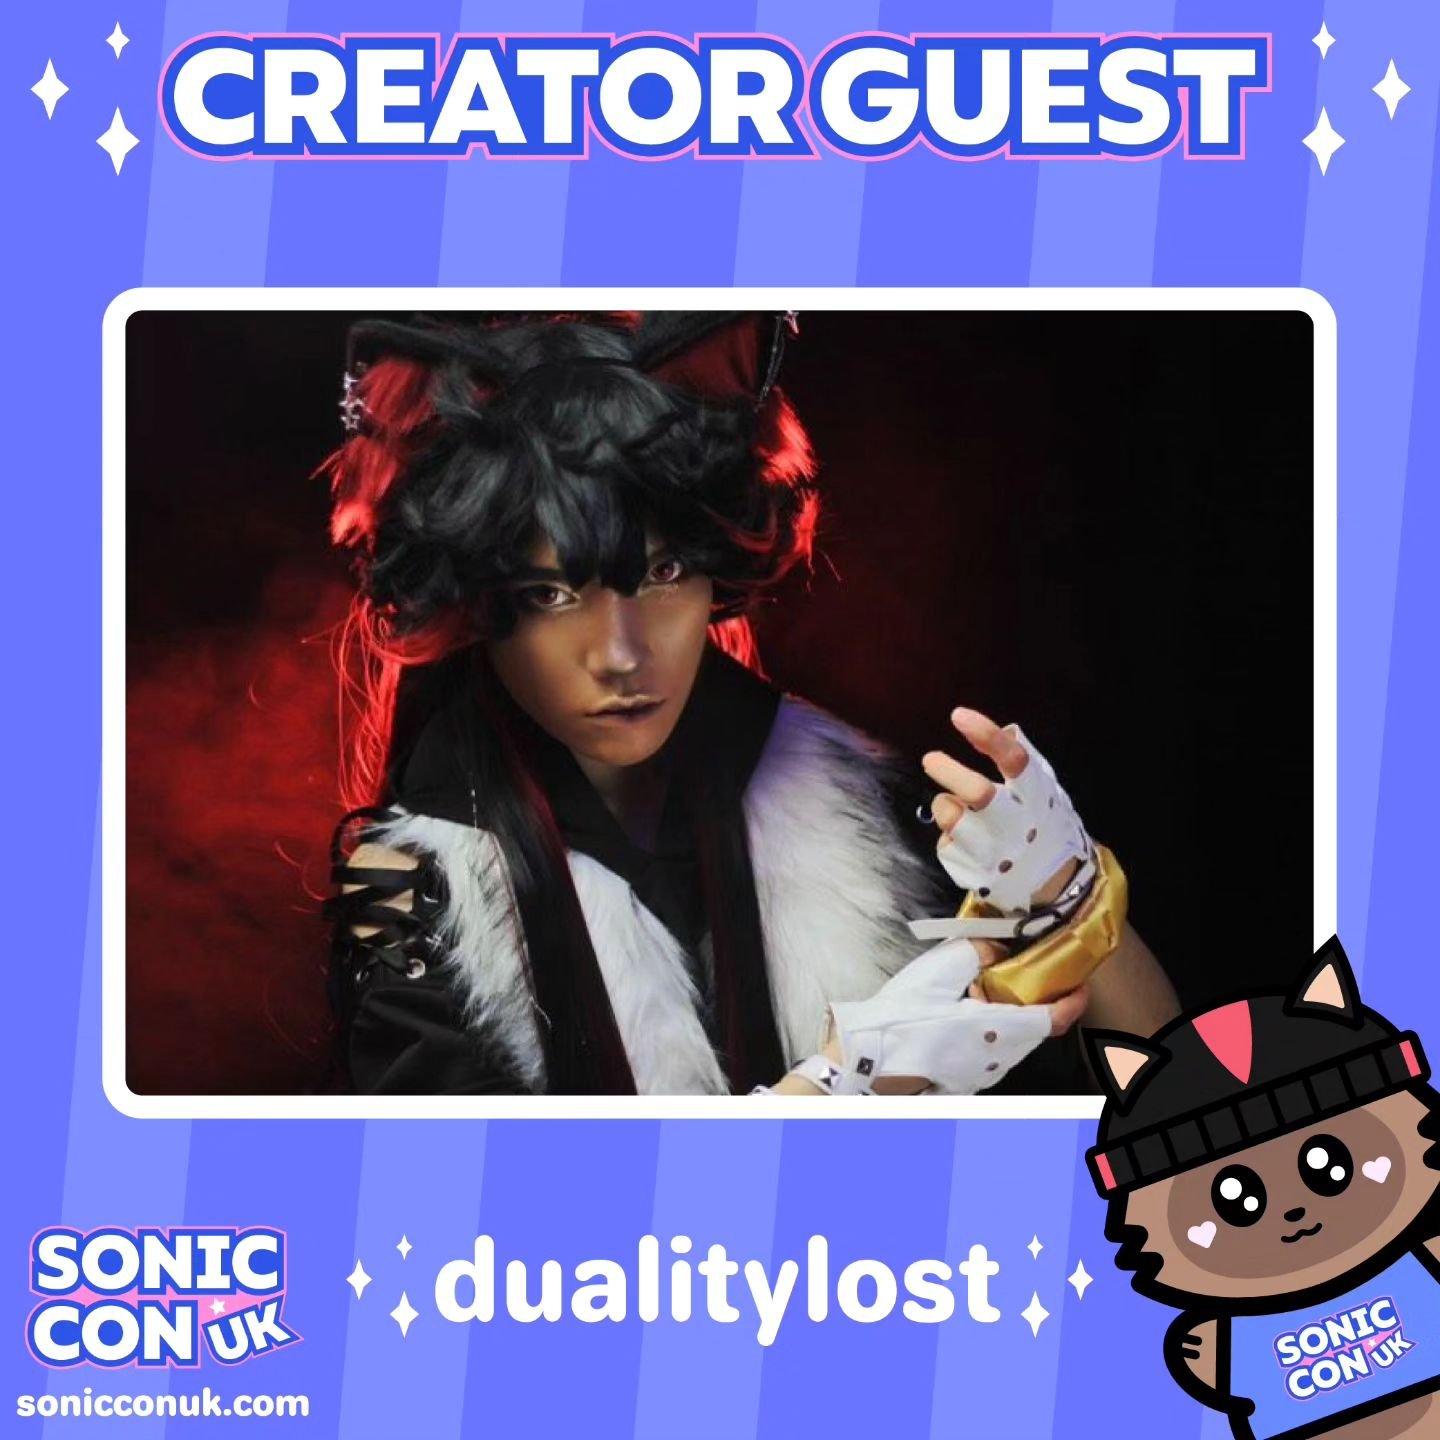 ✨ Creator guest announcement! ✨ 
We're excited to announce that @dualitylost will be joining us at Sonic Con UK! 💙

📸 by @kasm.pro

#shadowthehedgehog #shadowthehedgehogcosplay #sonicthehedgehog #sonicfan #sonicconvention